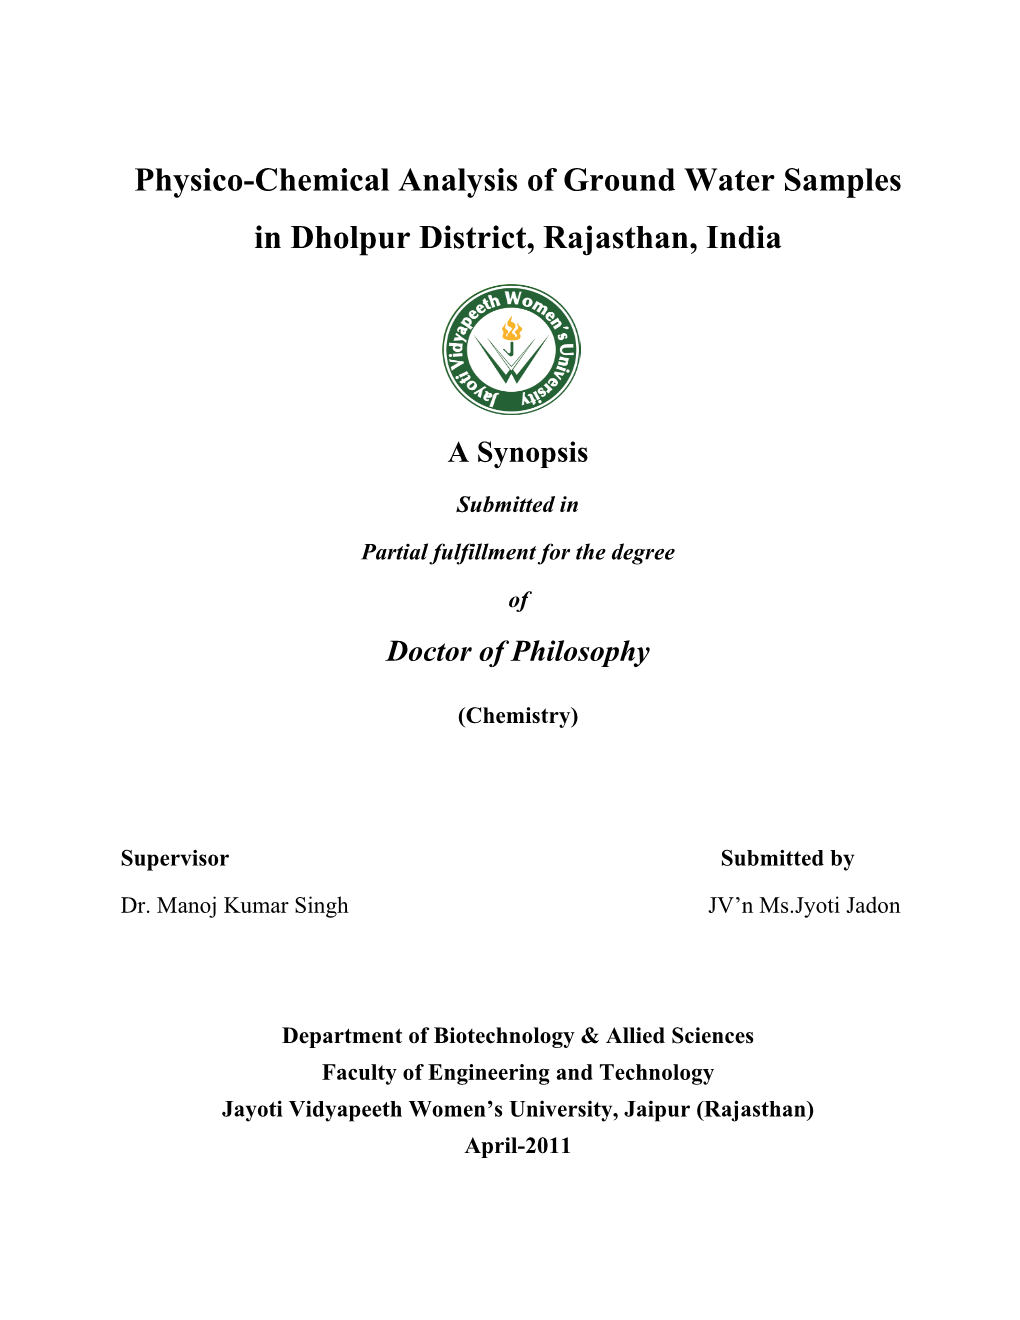 Physico-Chemical Analysis of Ground Water Samples in Dholpur District, Rajasthan, India